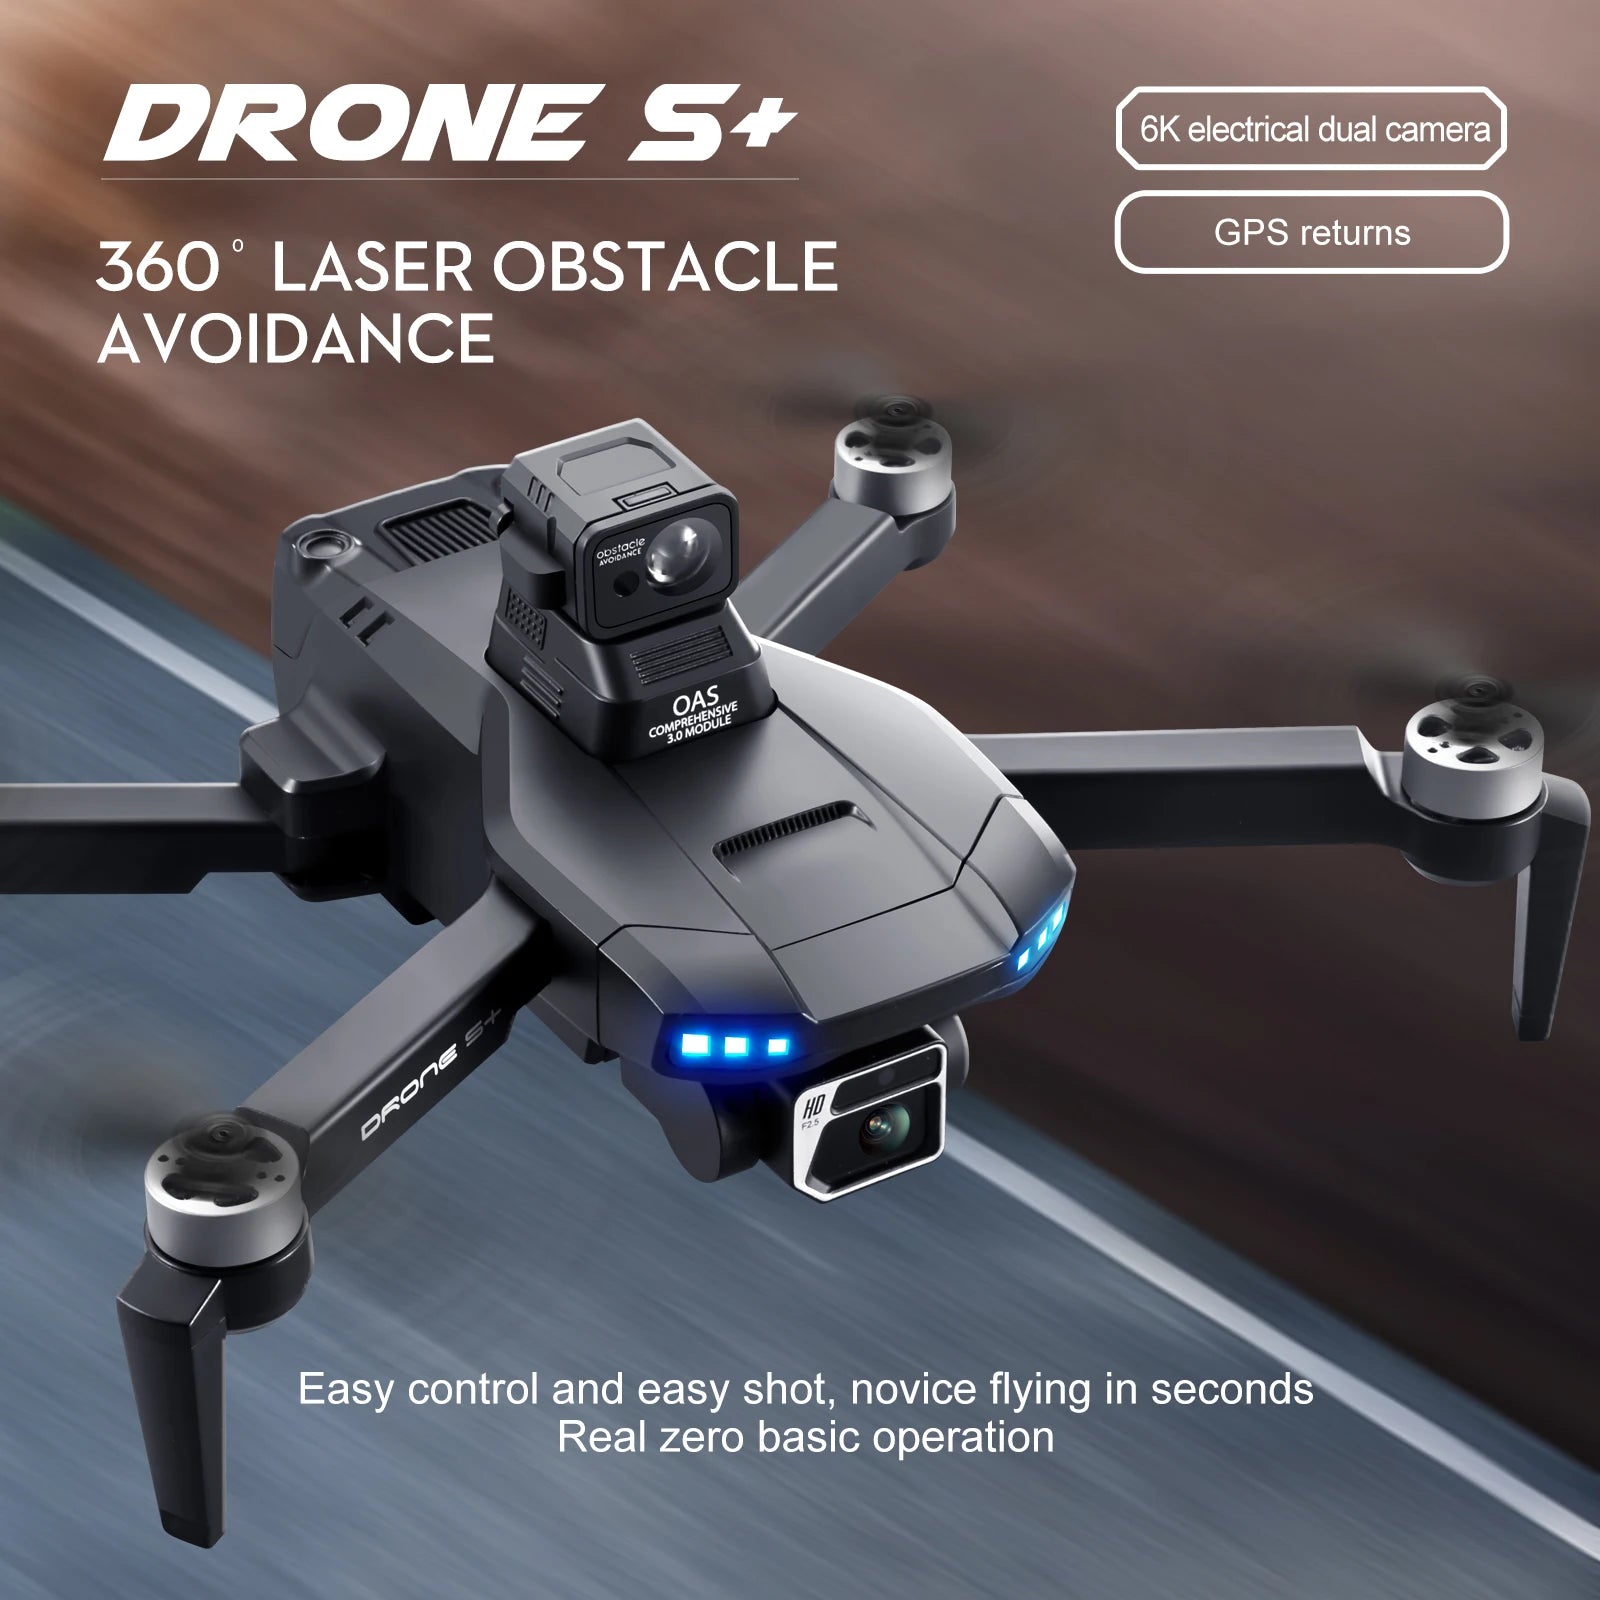 S+ GPS Drone, DRONE 5* 6K electrical dual camera GPS returns 360 LASER OBSTACLE